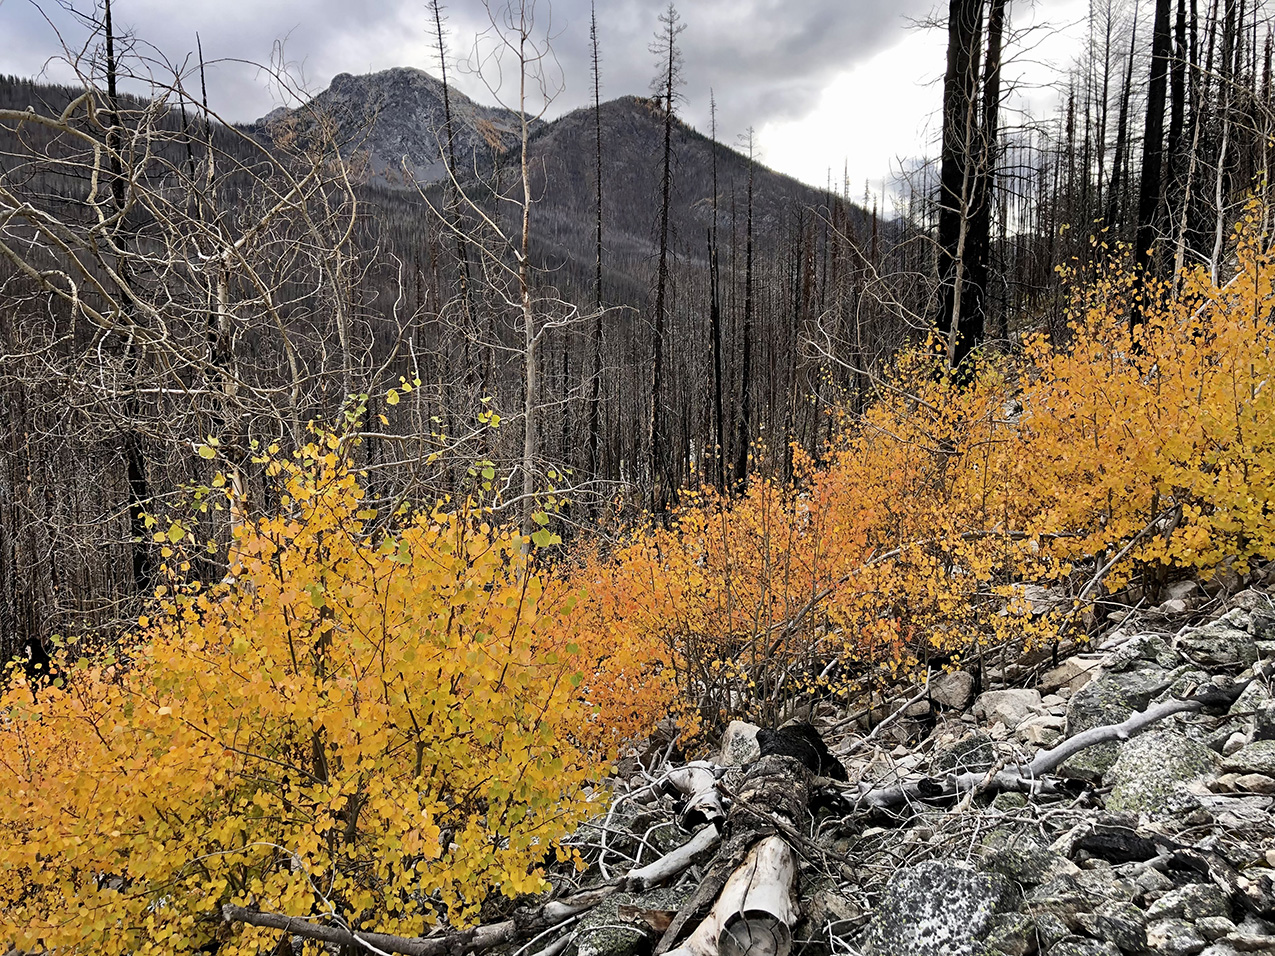 photo taken in the Okanogan National Forest shows a landscape post-wildfire – blackened trees with vibrant new undergrowth in fall colors